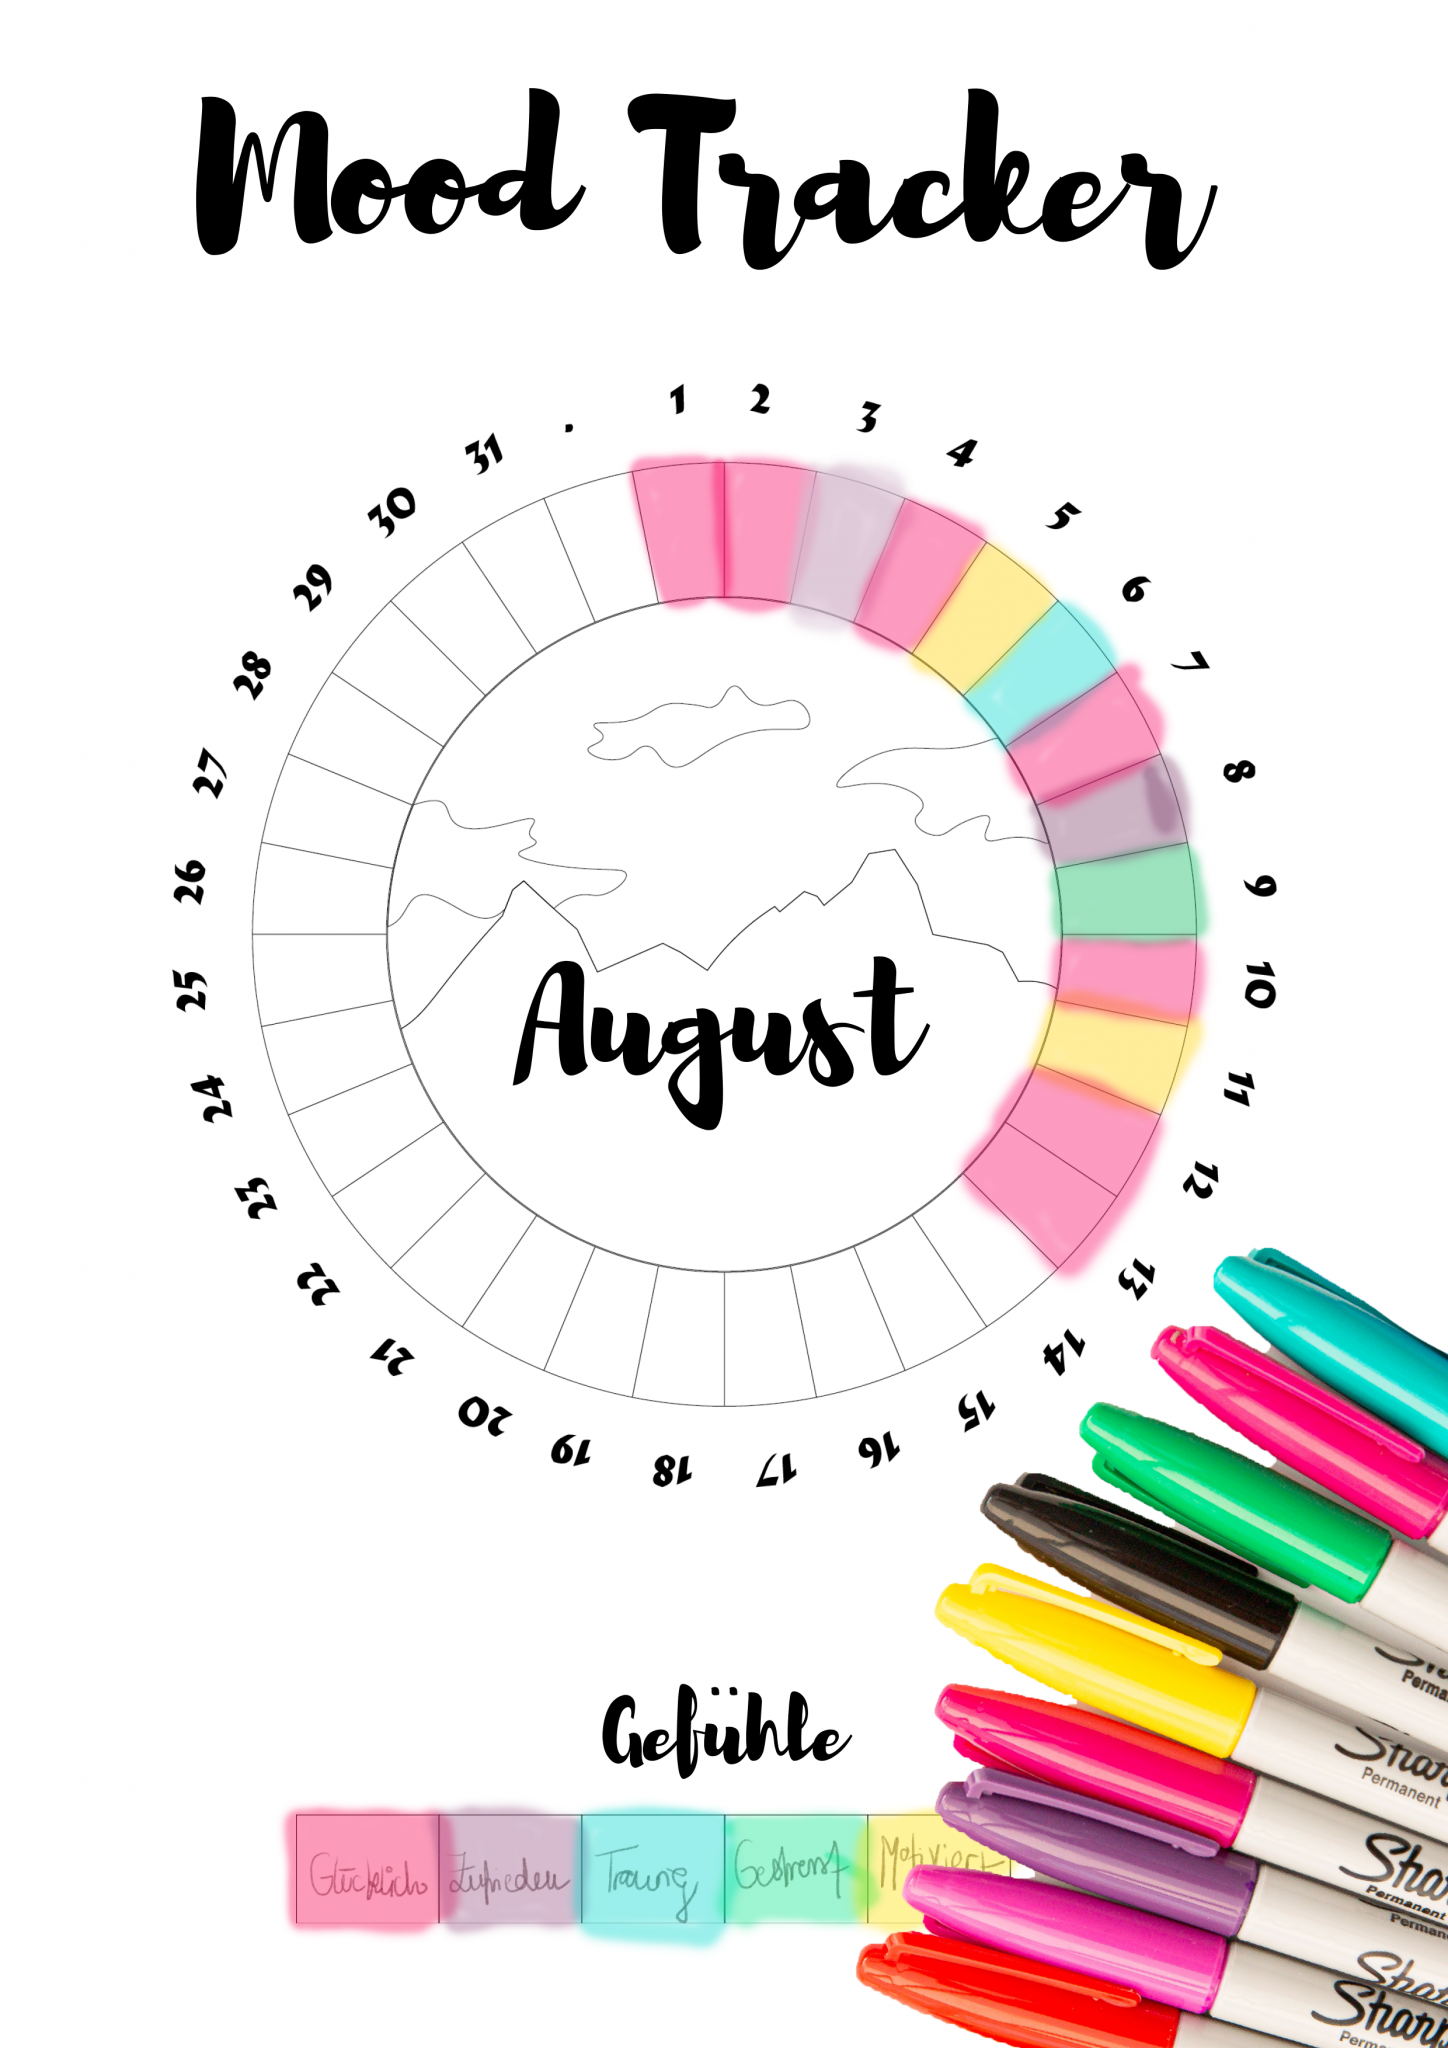 mood-tracker-besserme-months-practice-your-mindfulness